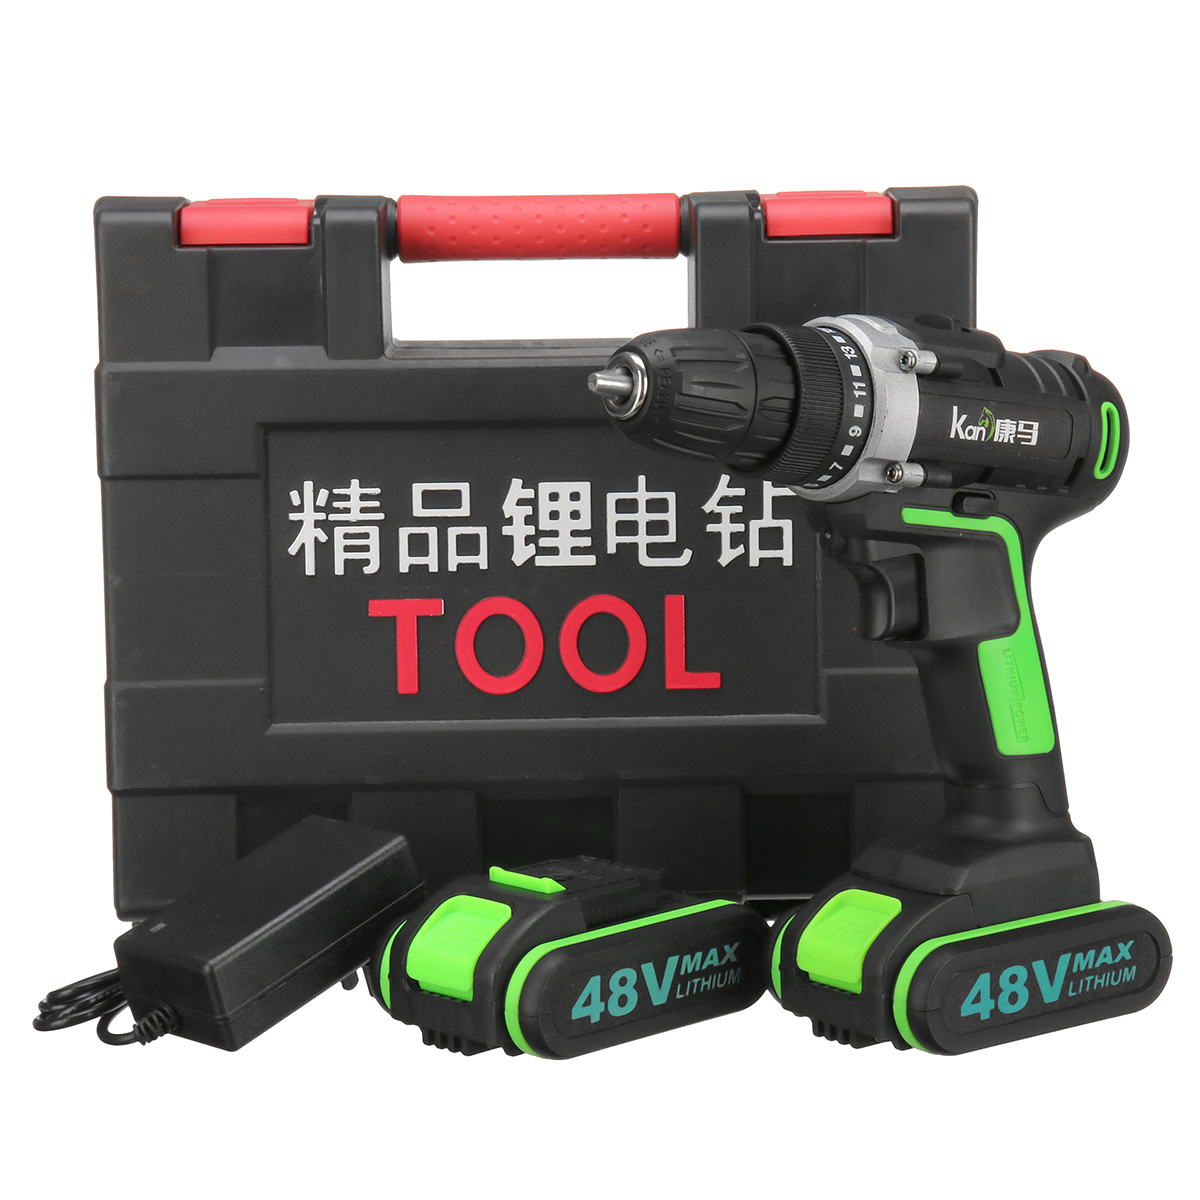 

48V 3 In 1 Cordless Power Drills 15+1 Torque Drilling Tool Dual Speed Electric Screwdriver Drill W/ 1 or 2 Li-ion Batter